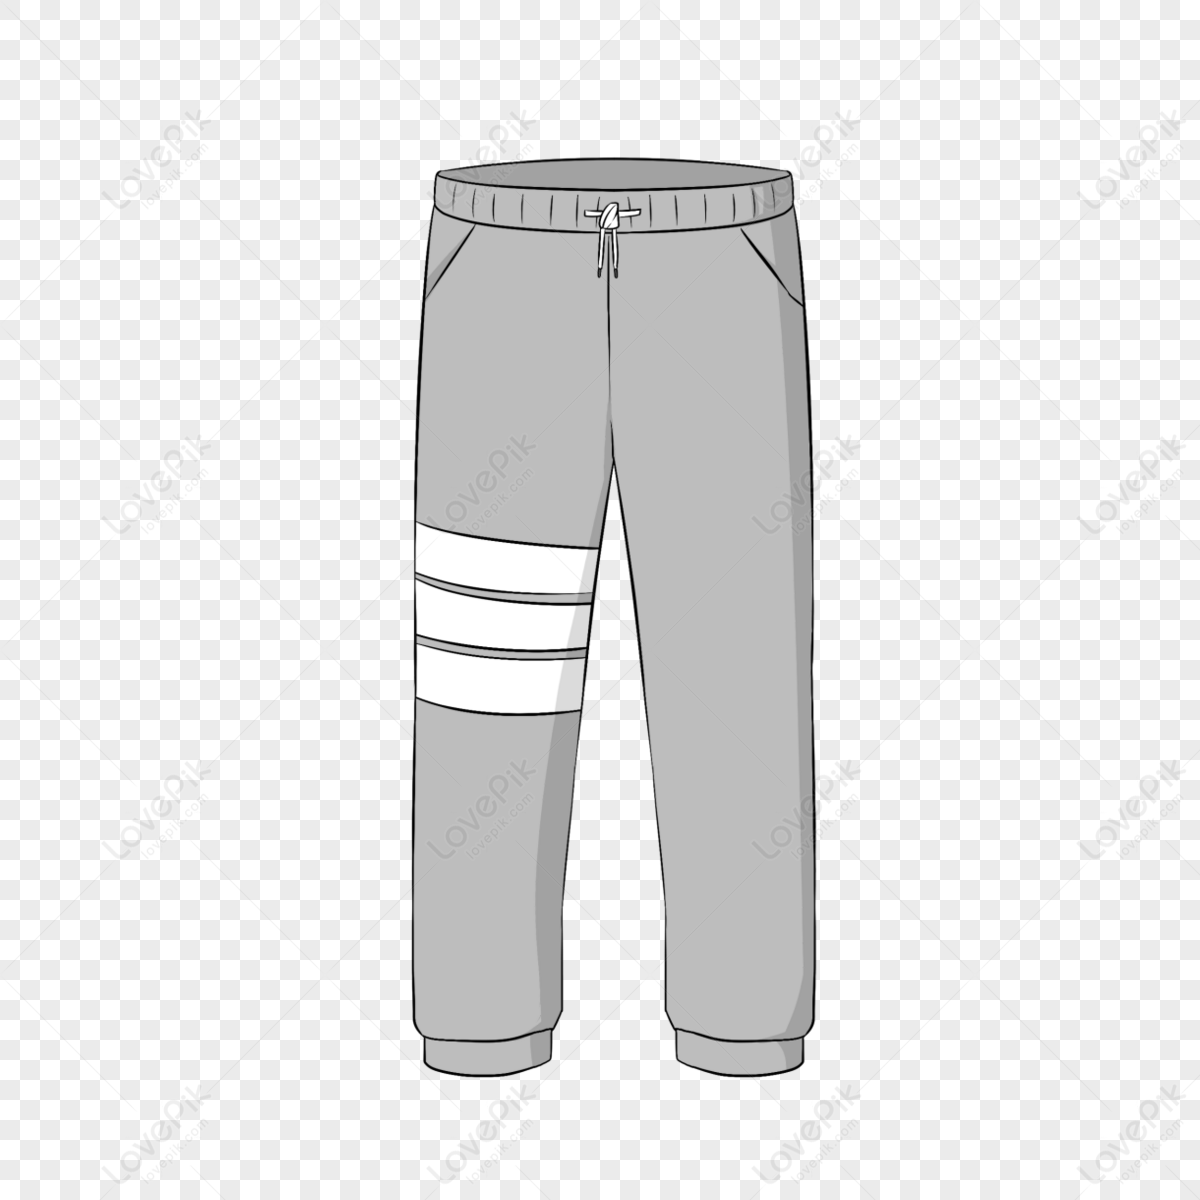 Download free photo of Clothes,clothing,pants,trousers,free vector graphics  - from needpix.com